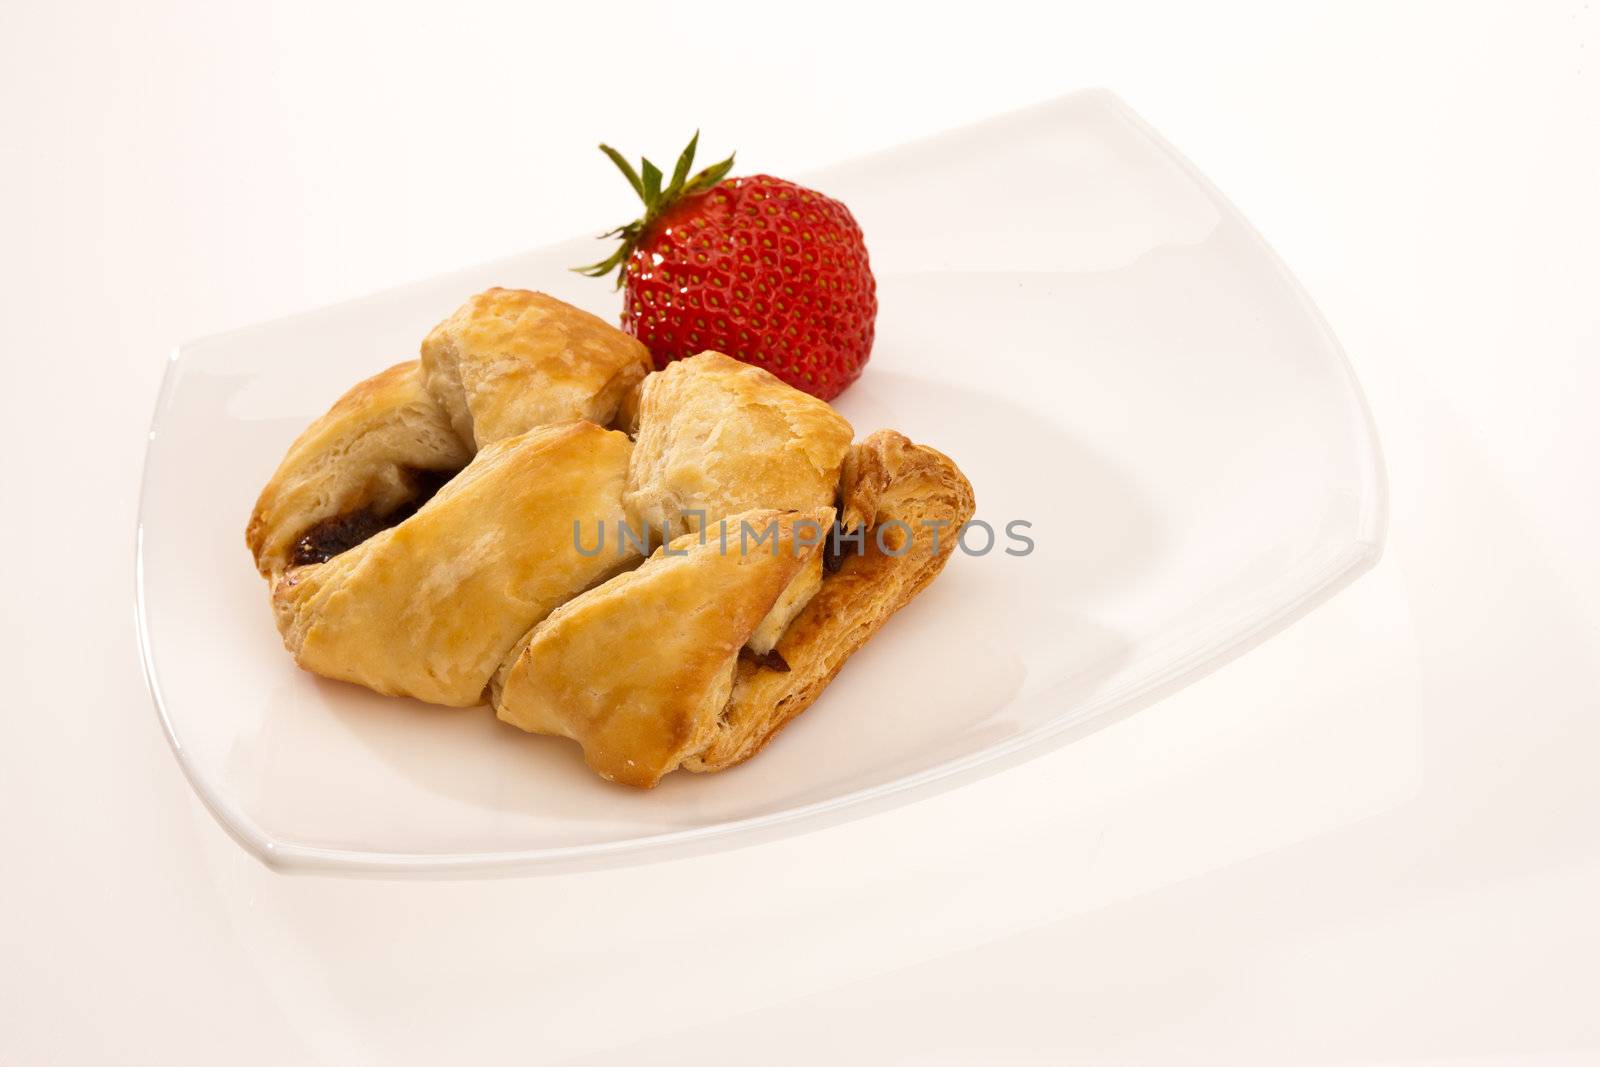 food series: tasty pastry with jam and strawberry